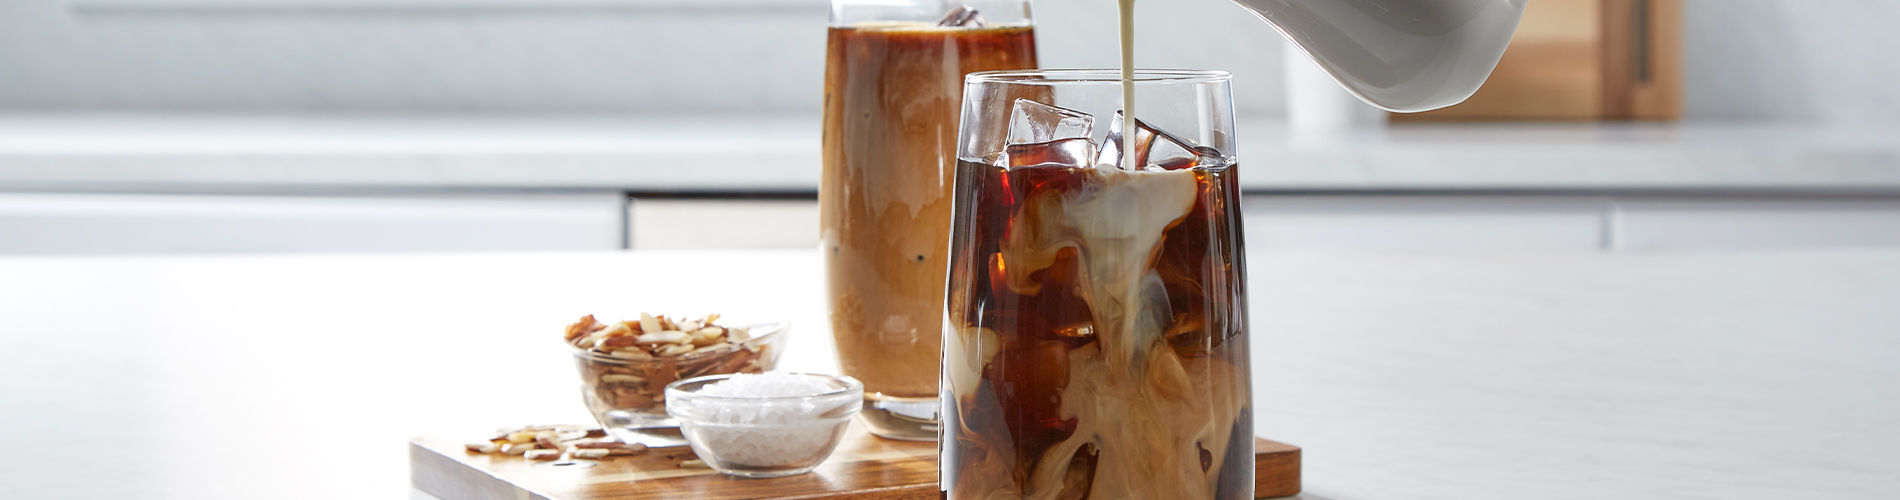 Be your own barista: Make cold brew coffee at home